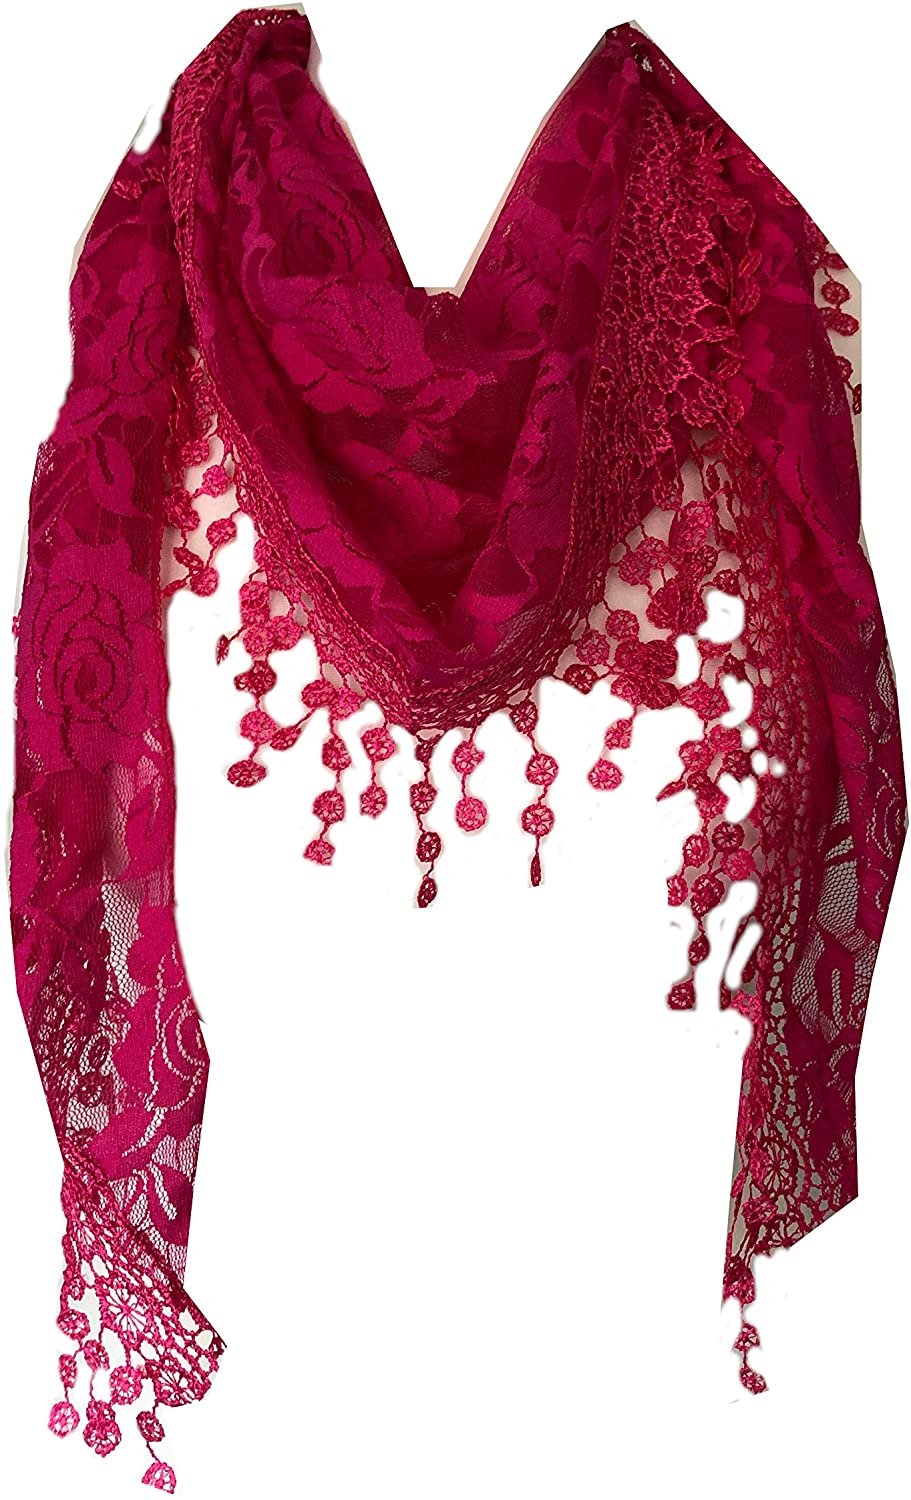 Pamper Yourself Now Fuchsia Pink Roses Designs lace Triangle Scarf. a Lovely Fashion Item. Fantastic Gift